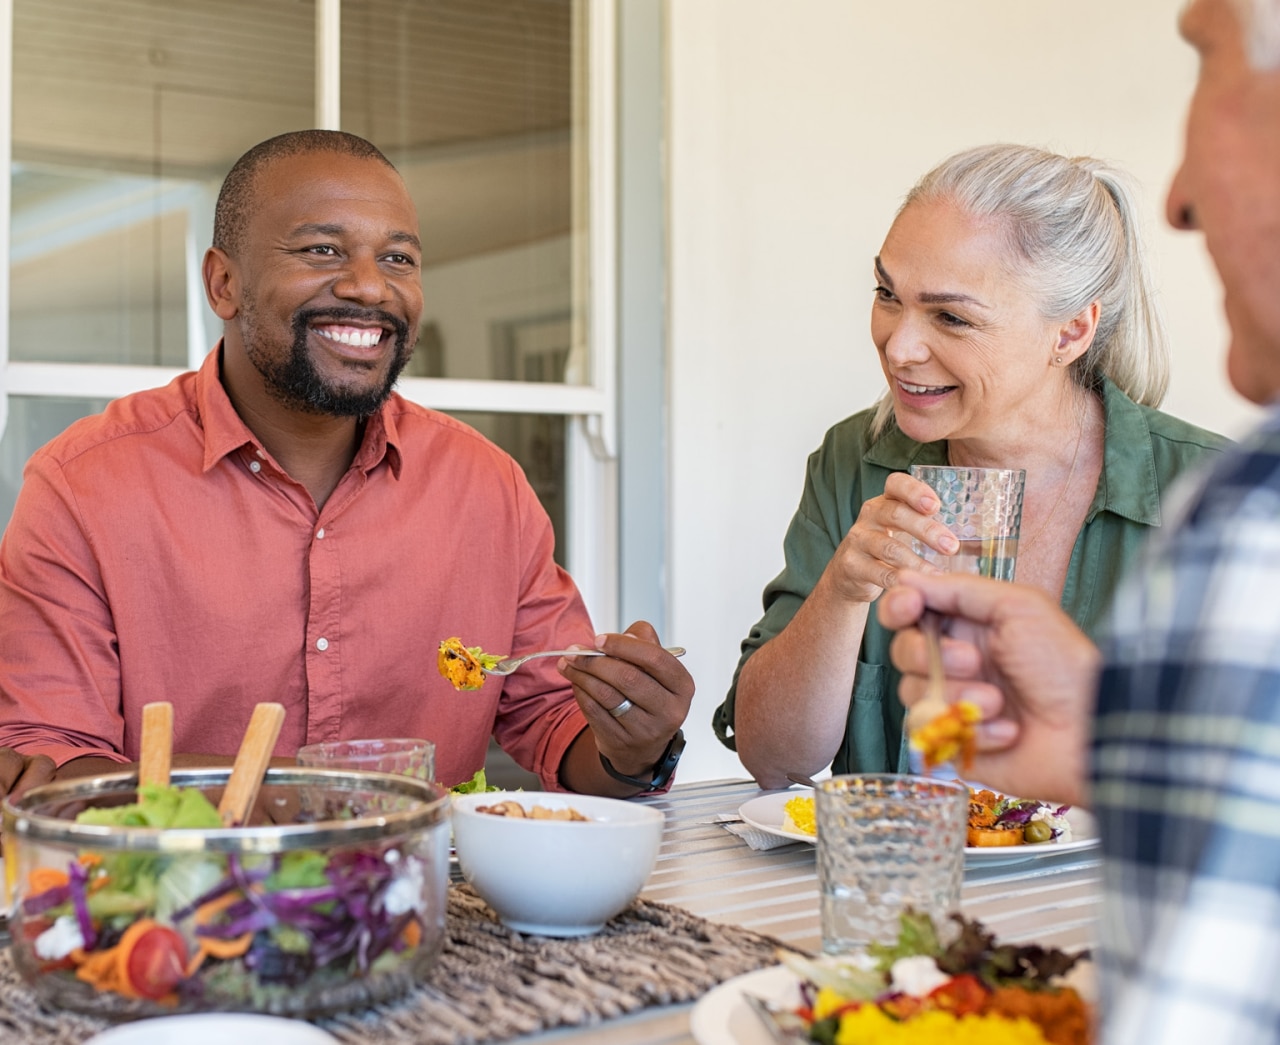 Happy smiling friends enjoying lunch together at home. Mature multiethnic people celebrating happy occasion while eating healthy food. Group of senior couple and african couple talking during meal.; Shutterstock ID 1418121731; purchase_order: -; job: -; client: -; other: -